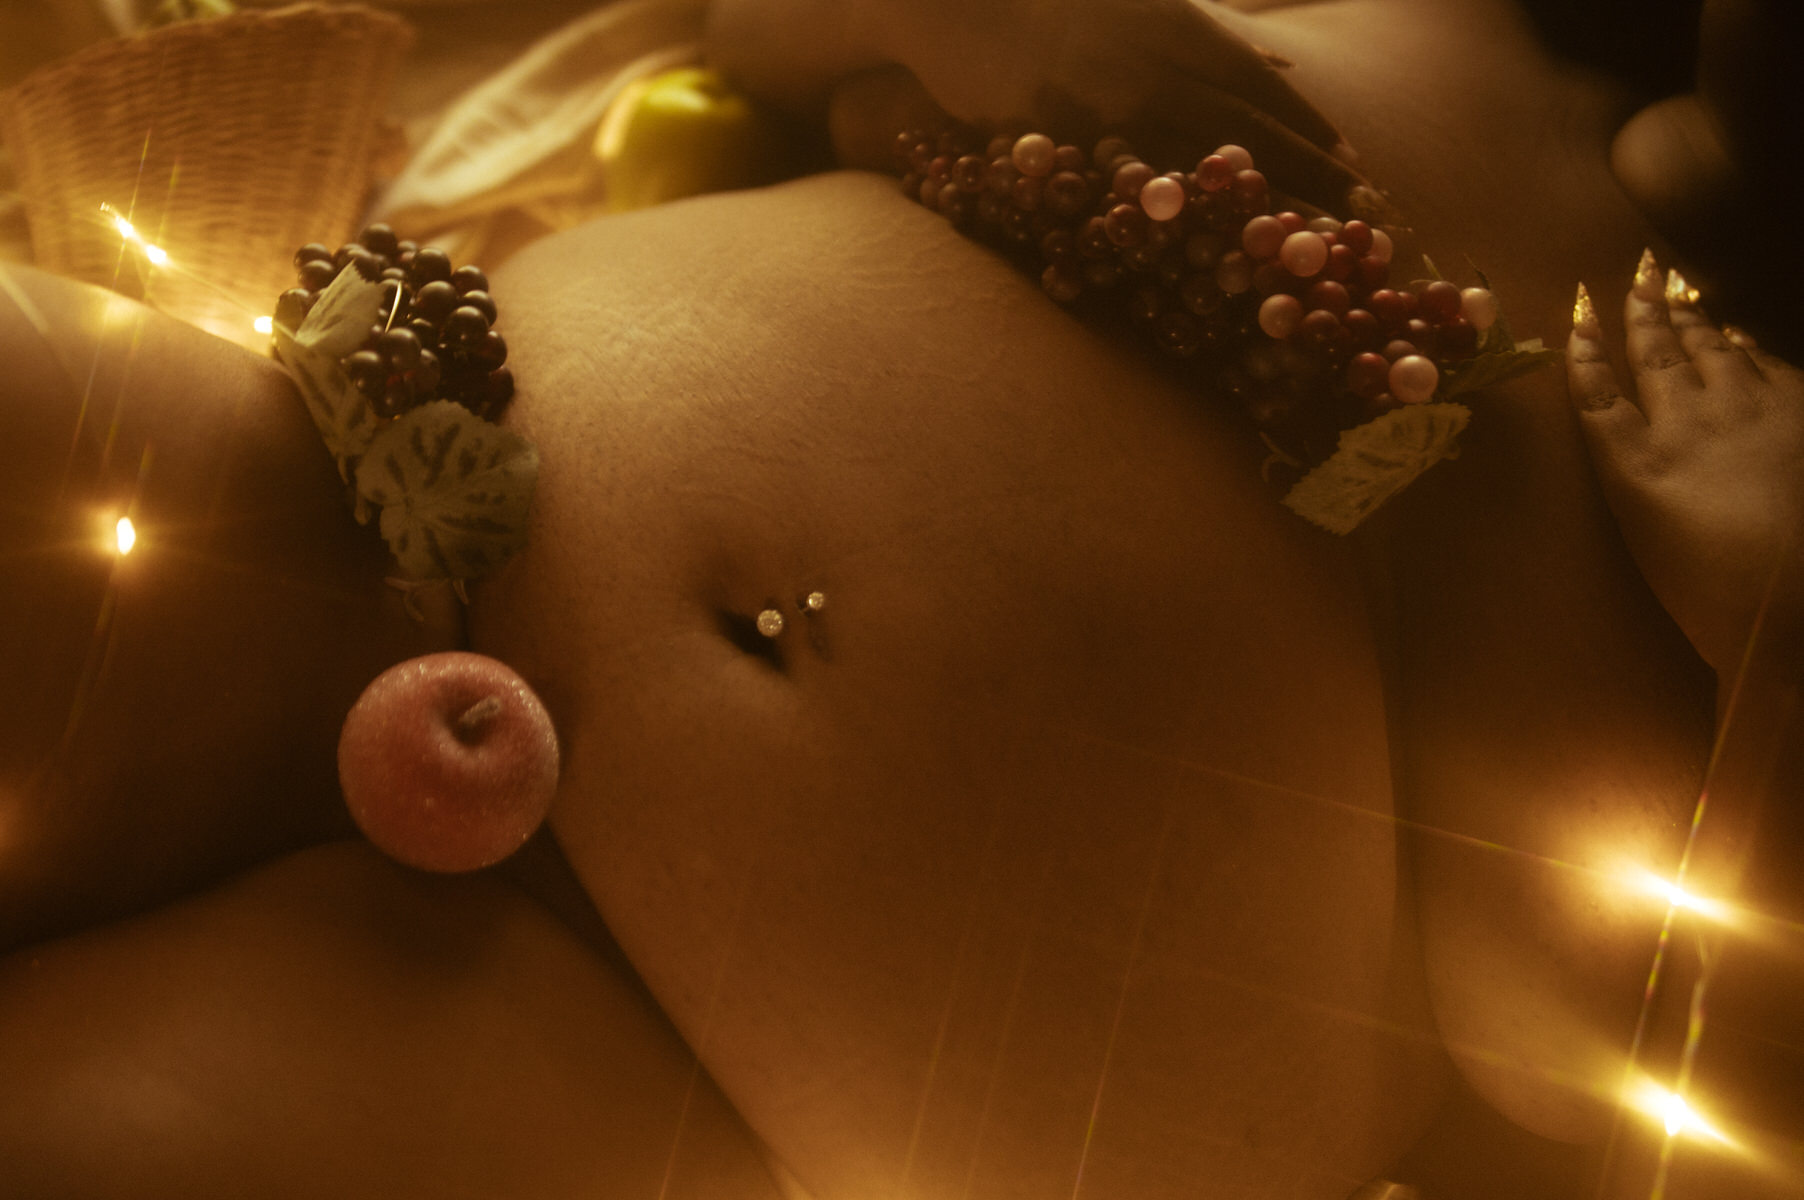 A woman laying on a bed with fruit on her stomach.